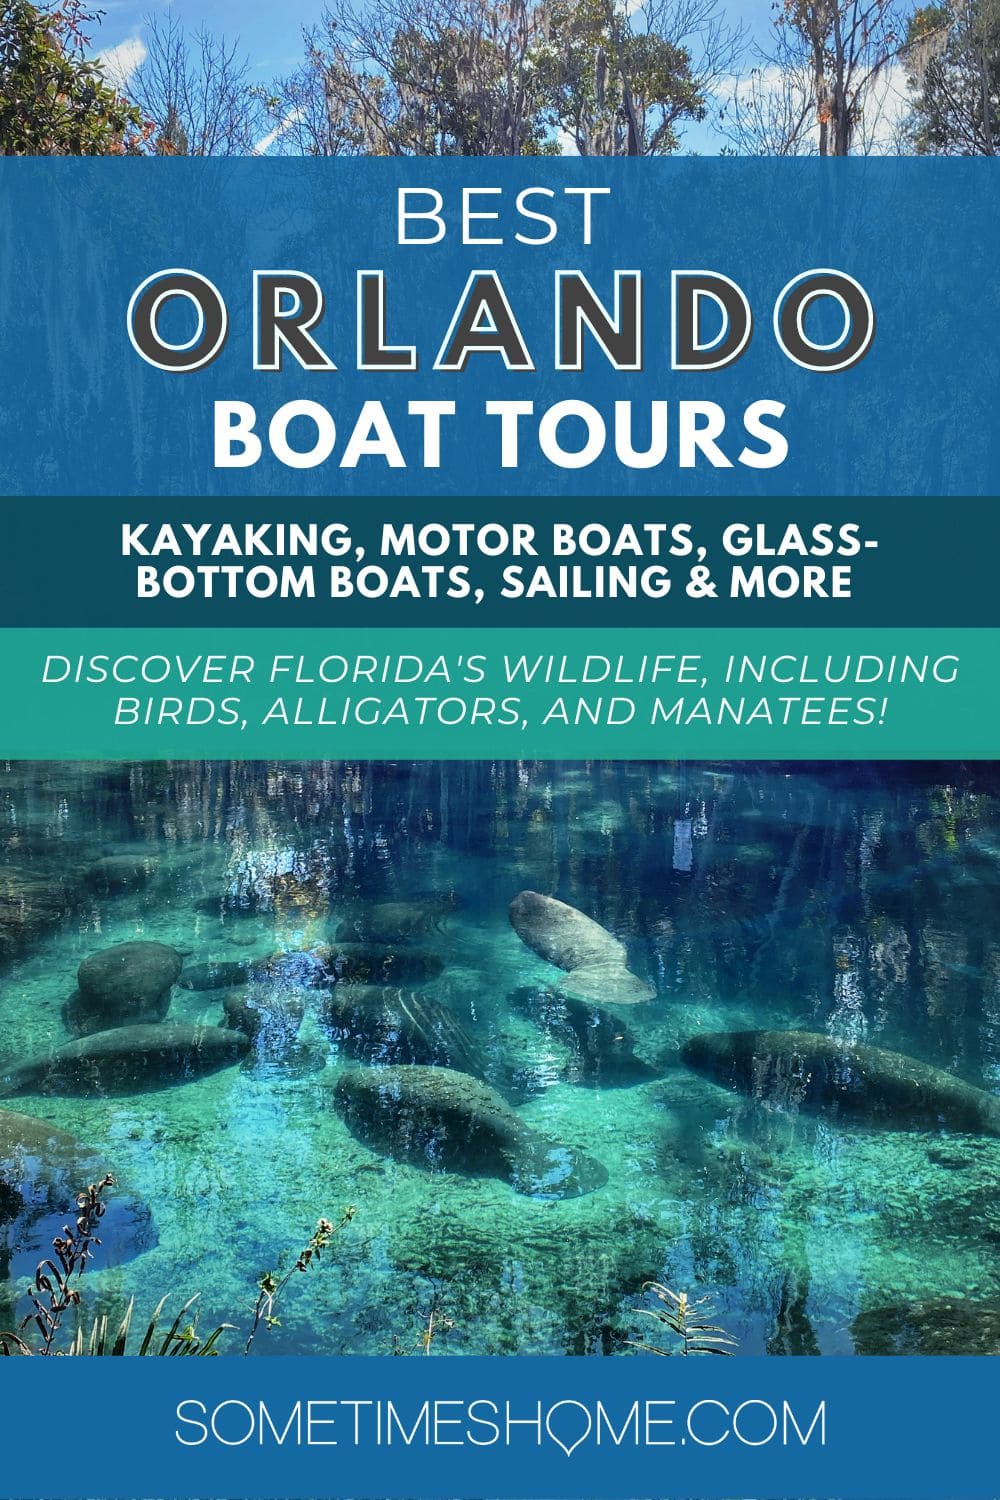 Best Orlando Boat Tours: Kayaking, Motor Boats, Glass-Bottom Boats, Sailing and More. Discover Florida's wildlife... with a photo of Manatees in the water behind the words.